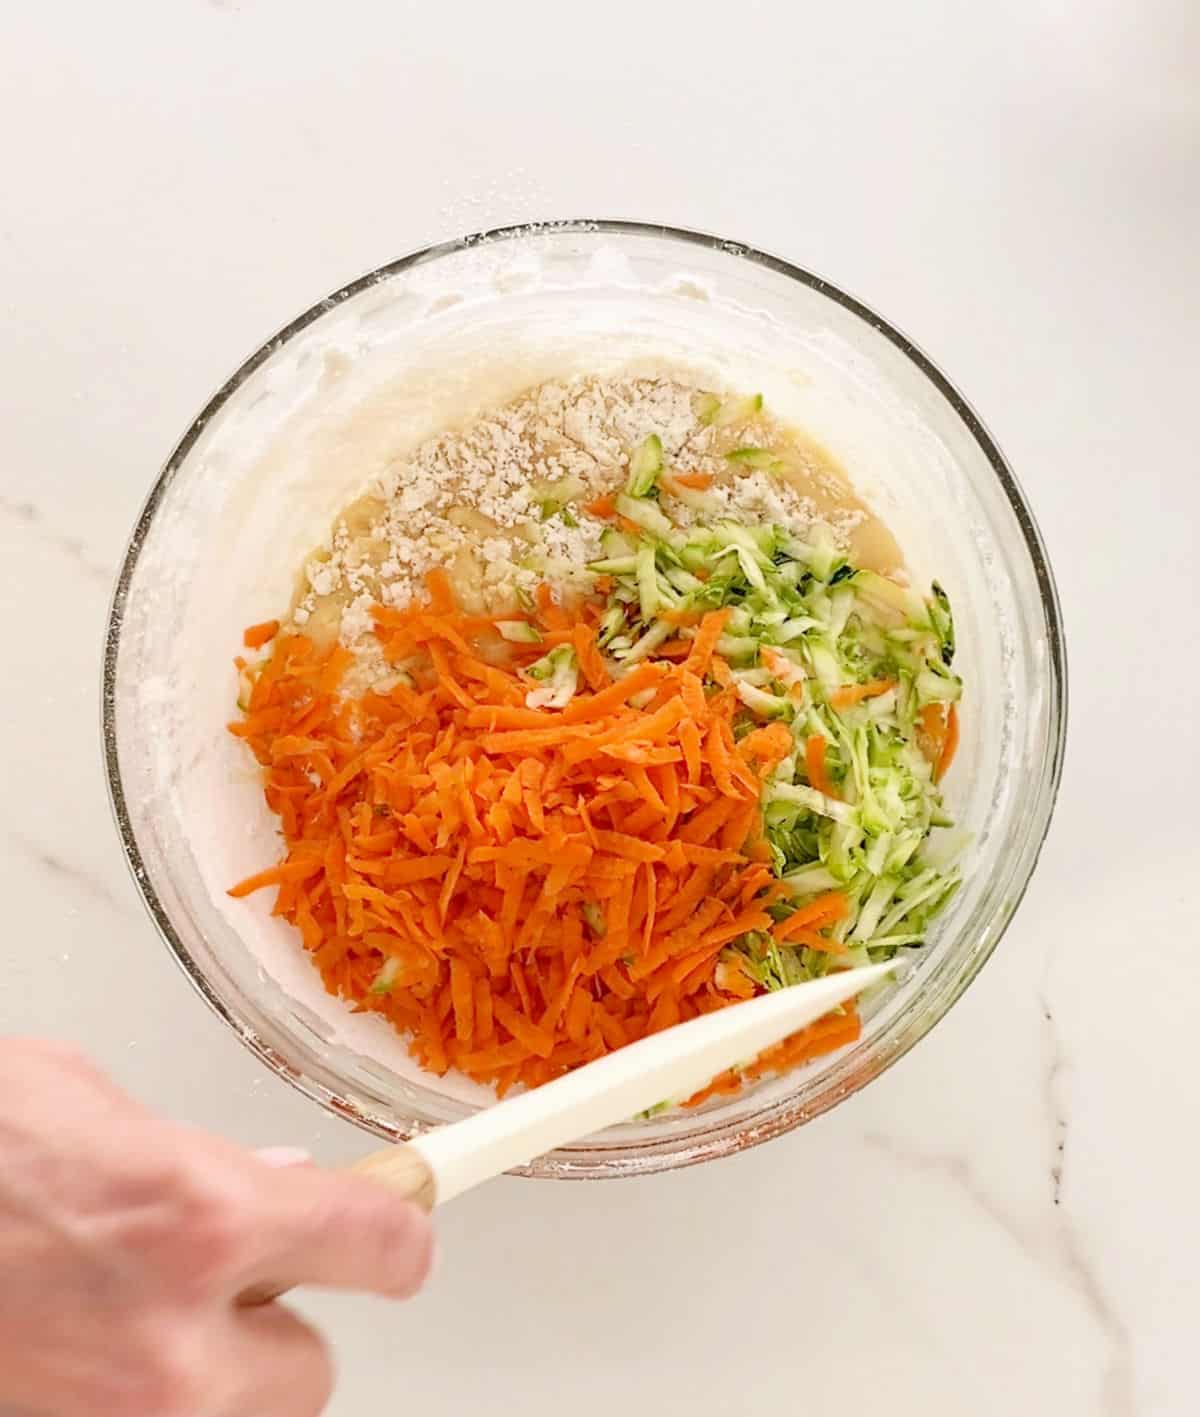 Grated zucchini and carrot added to muffin mixture in a glass bowl. White marbled surface. Hand holding a spatula.